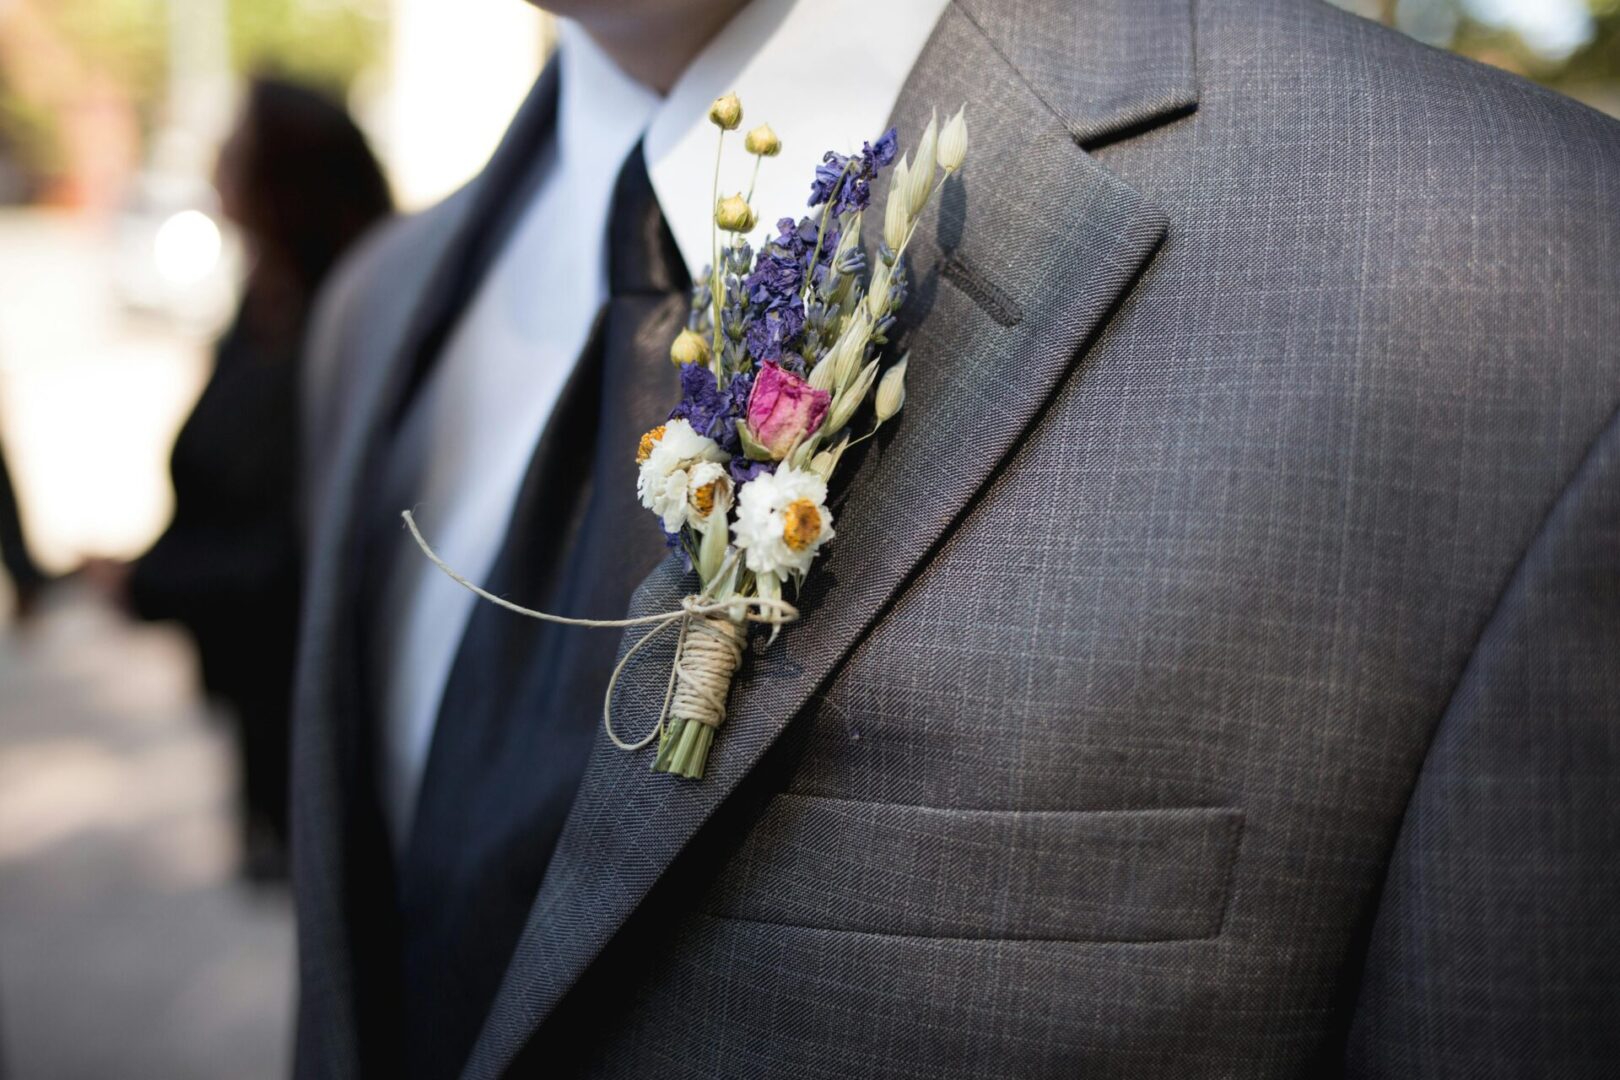 A man in a suit and tie with flowers on his lapel.